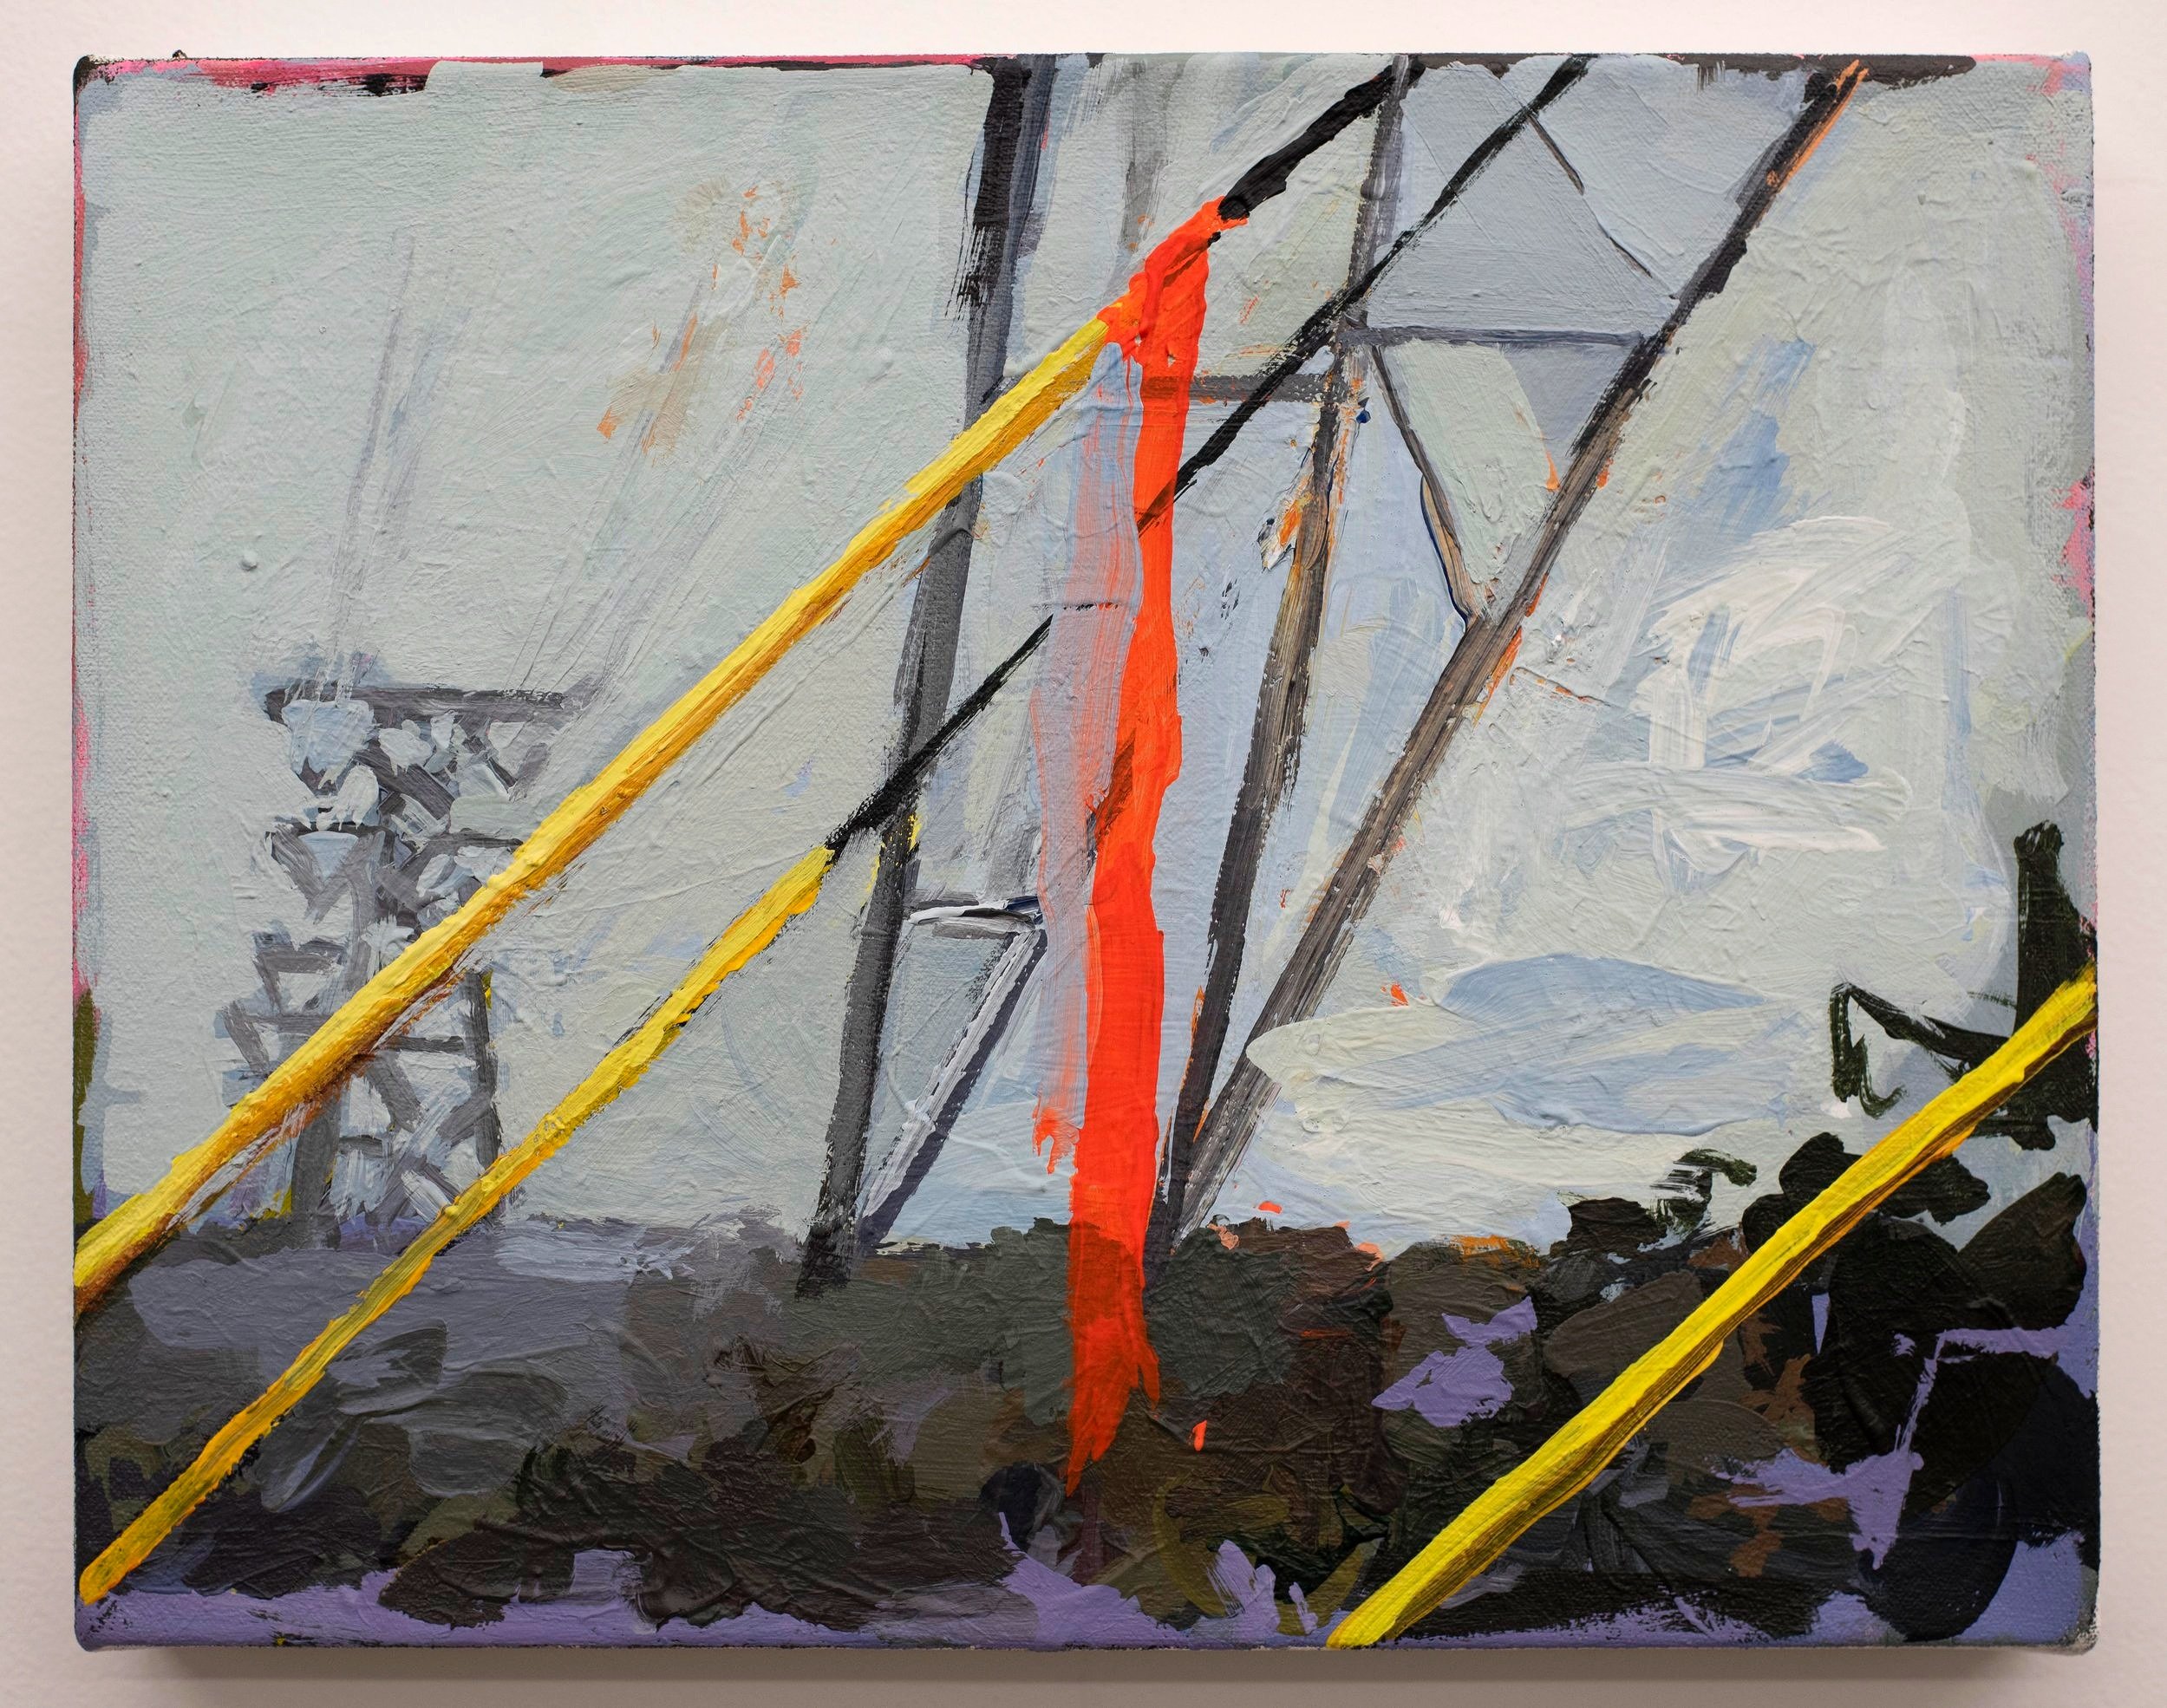  Survey Tape on Power Lines #2, acrylic on canvas, 11 x 14 inches, 2021 